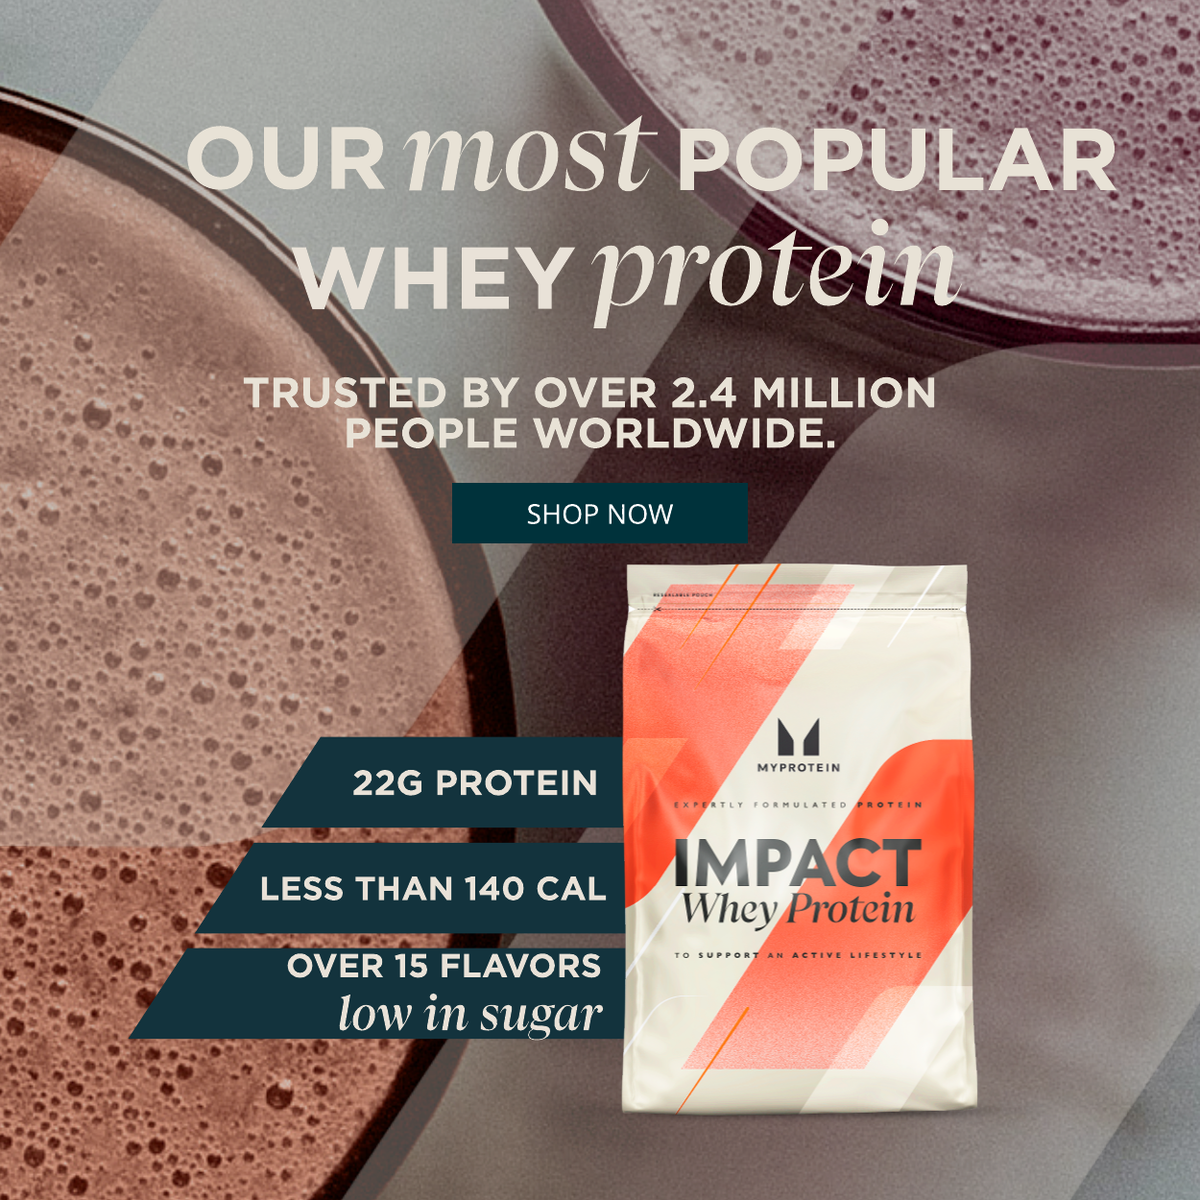 Our most popular whey protein. Trusted by over 2.4 million people worldwide. Shop Now.